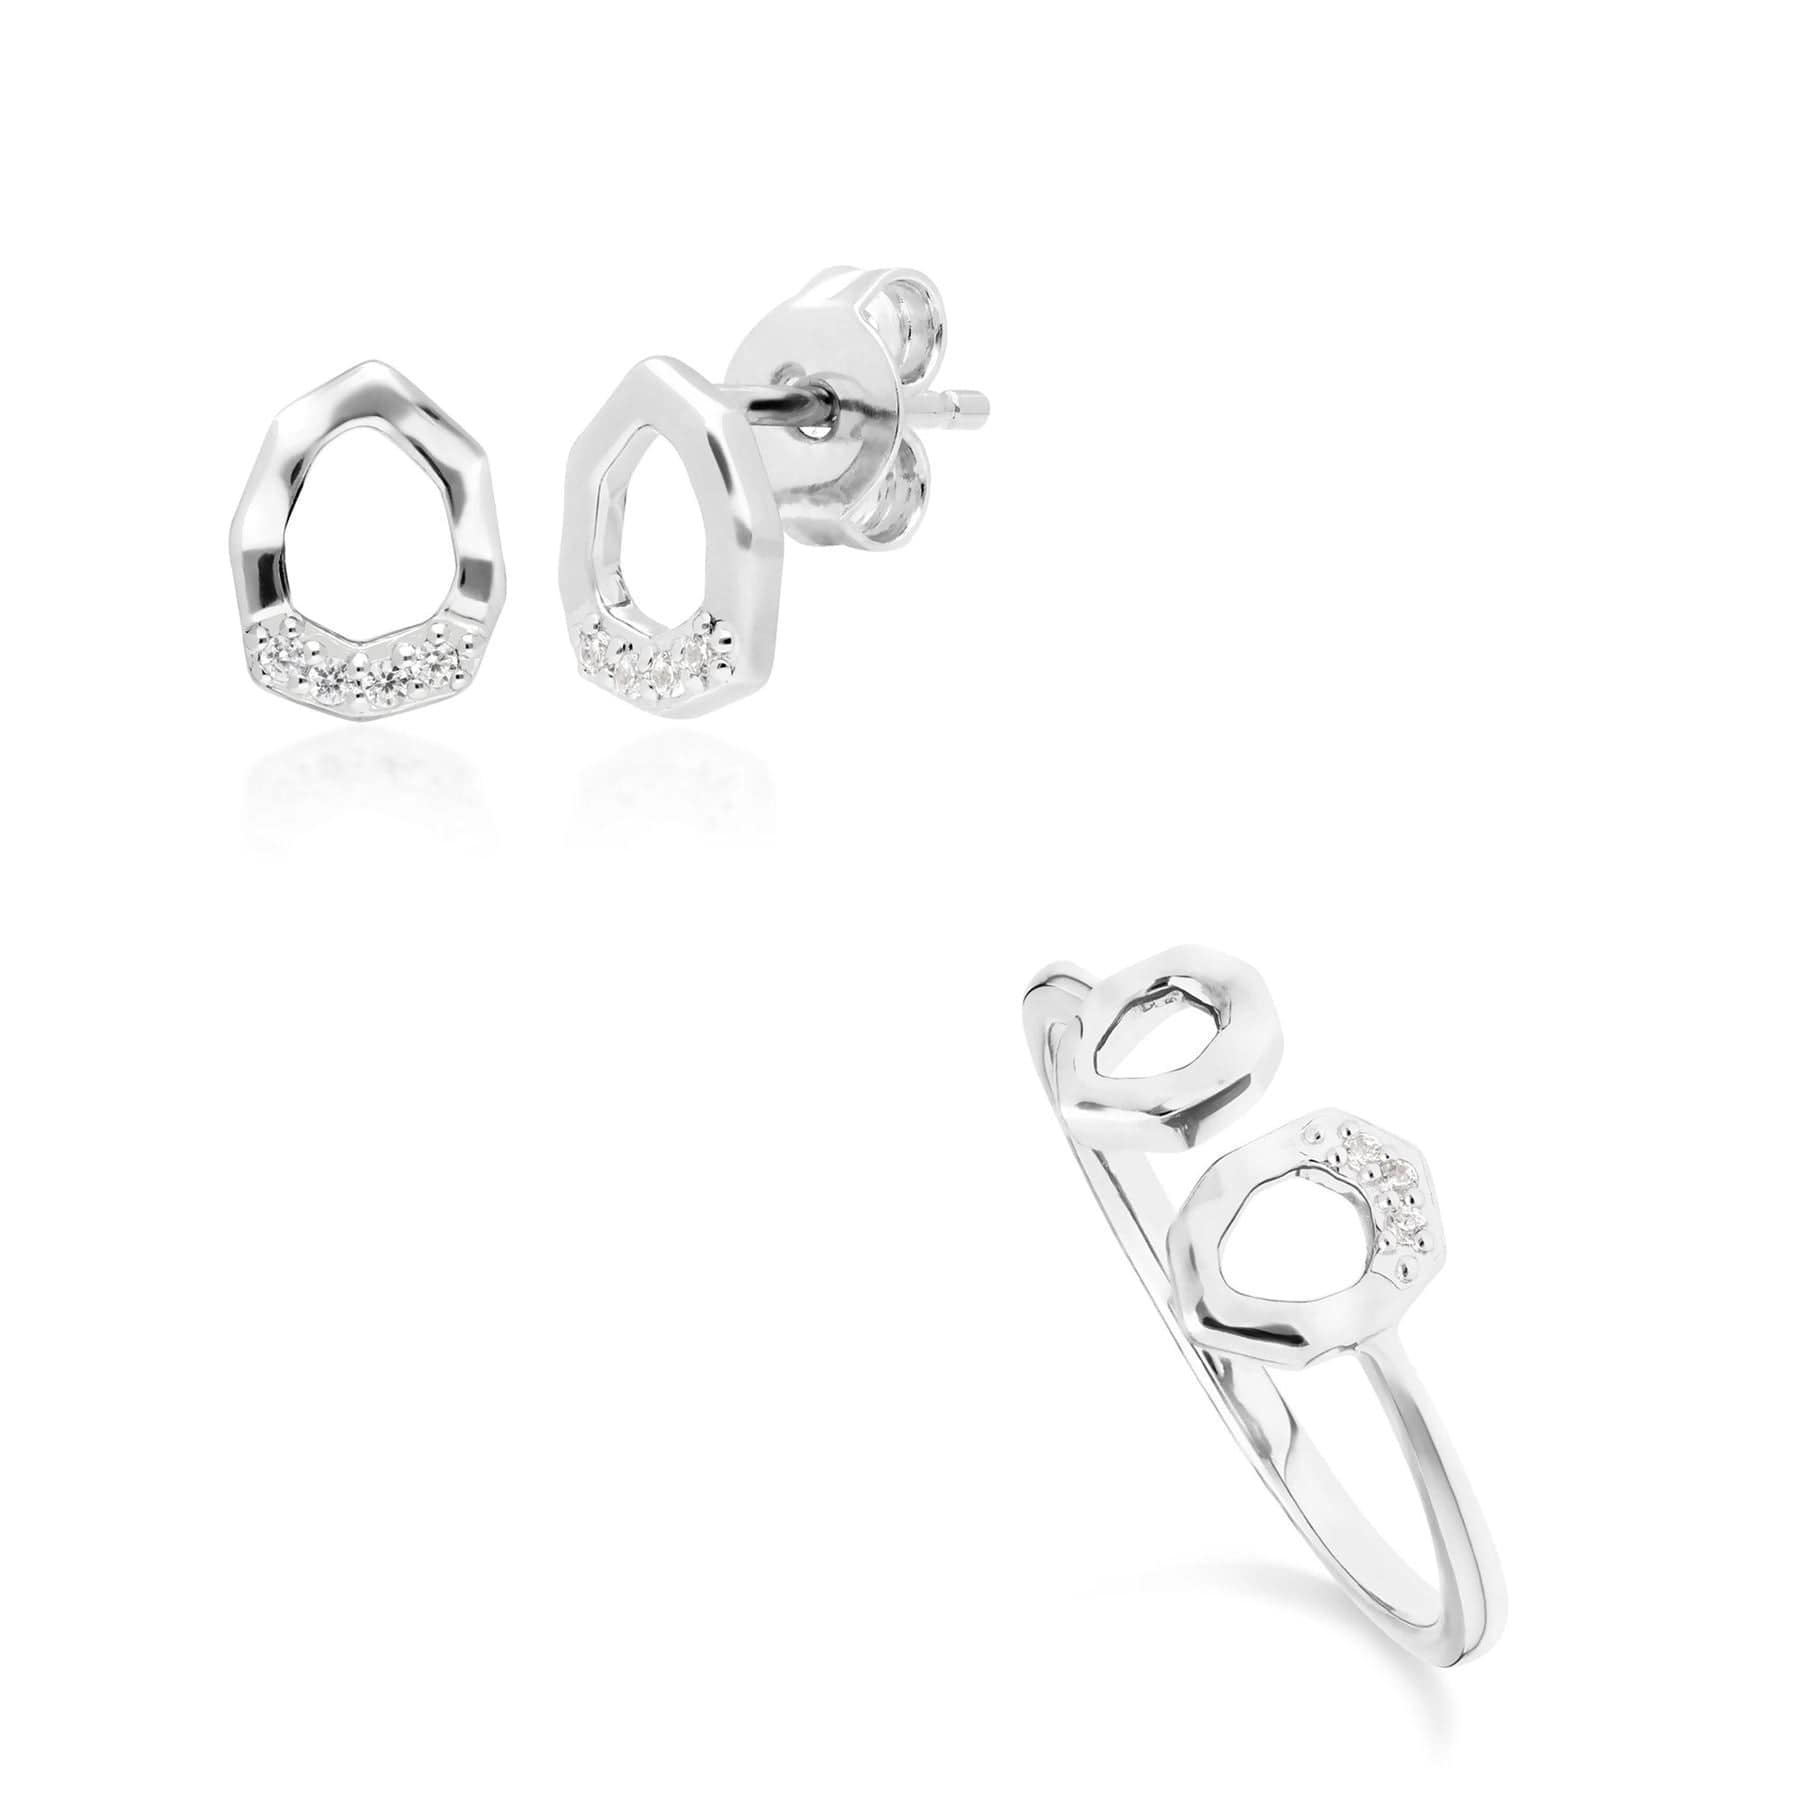 Diamond Pave Asymmetrical Stud Earring & Ring Set in 9ct White Gold